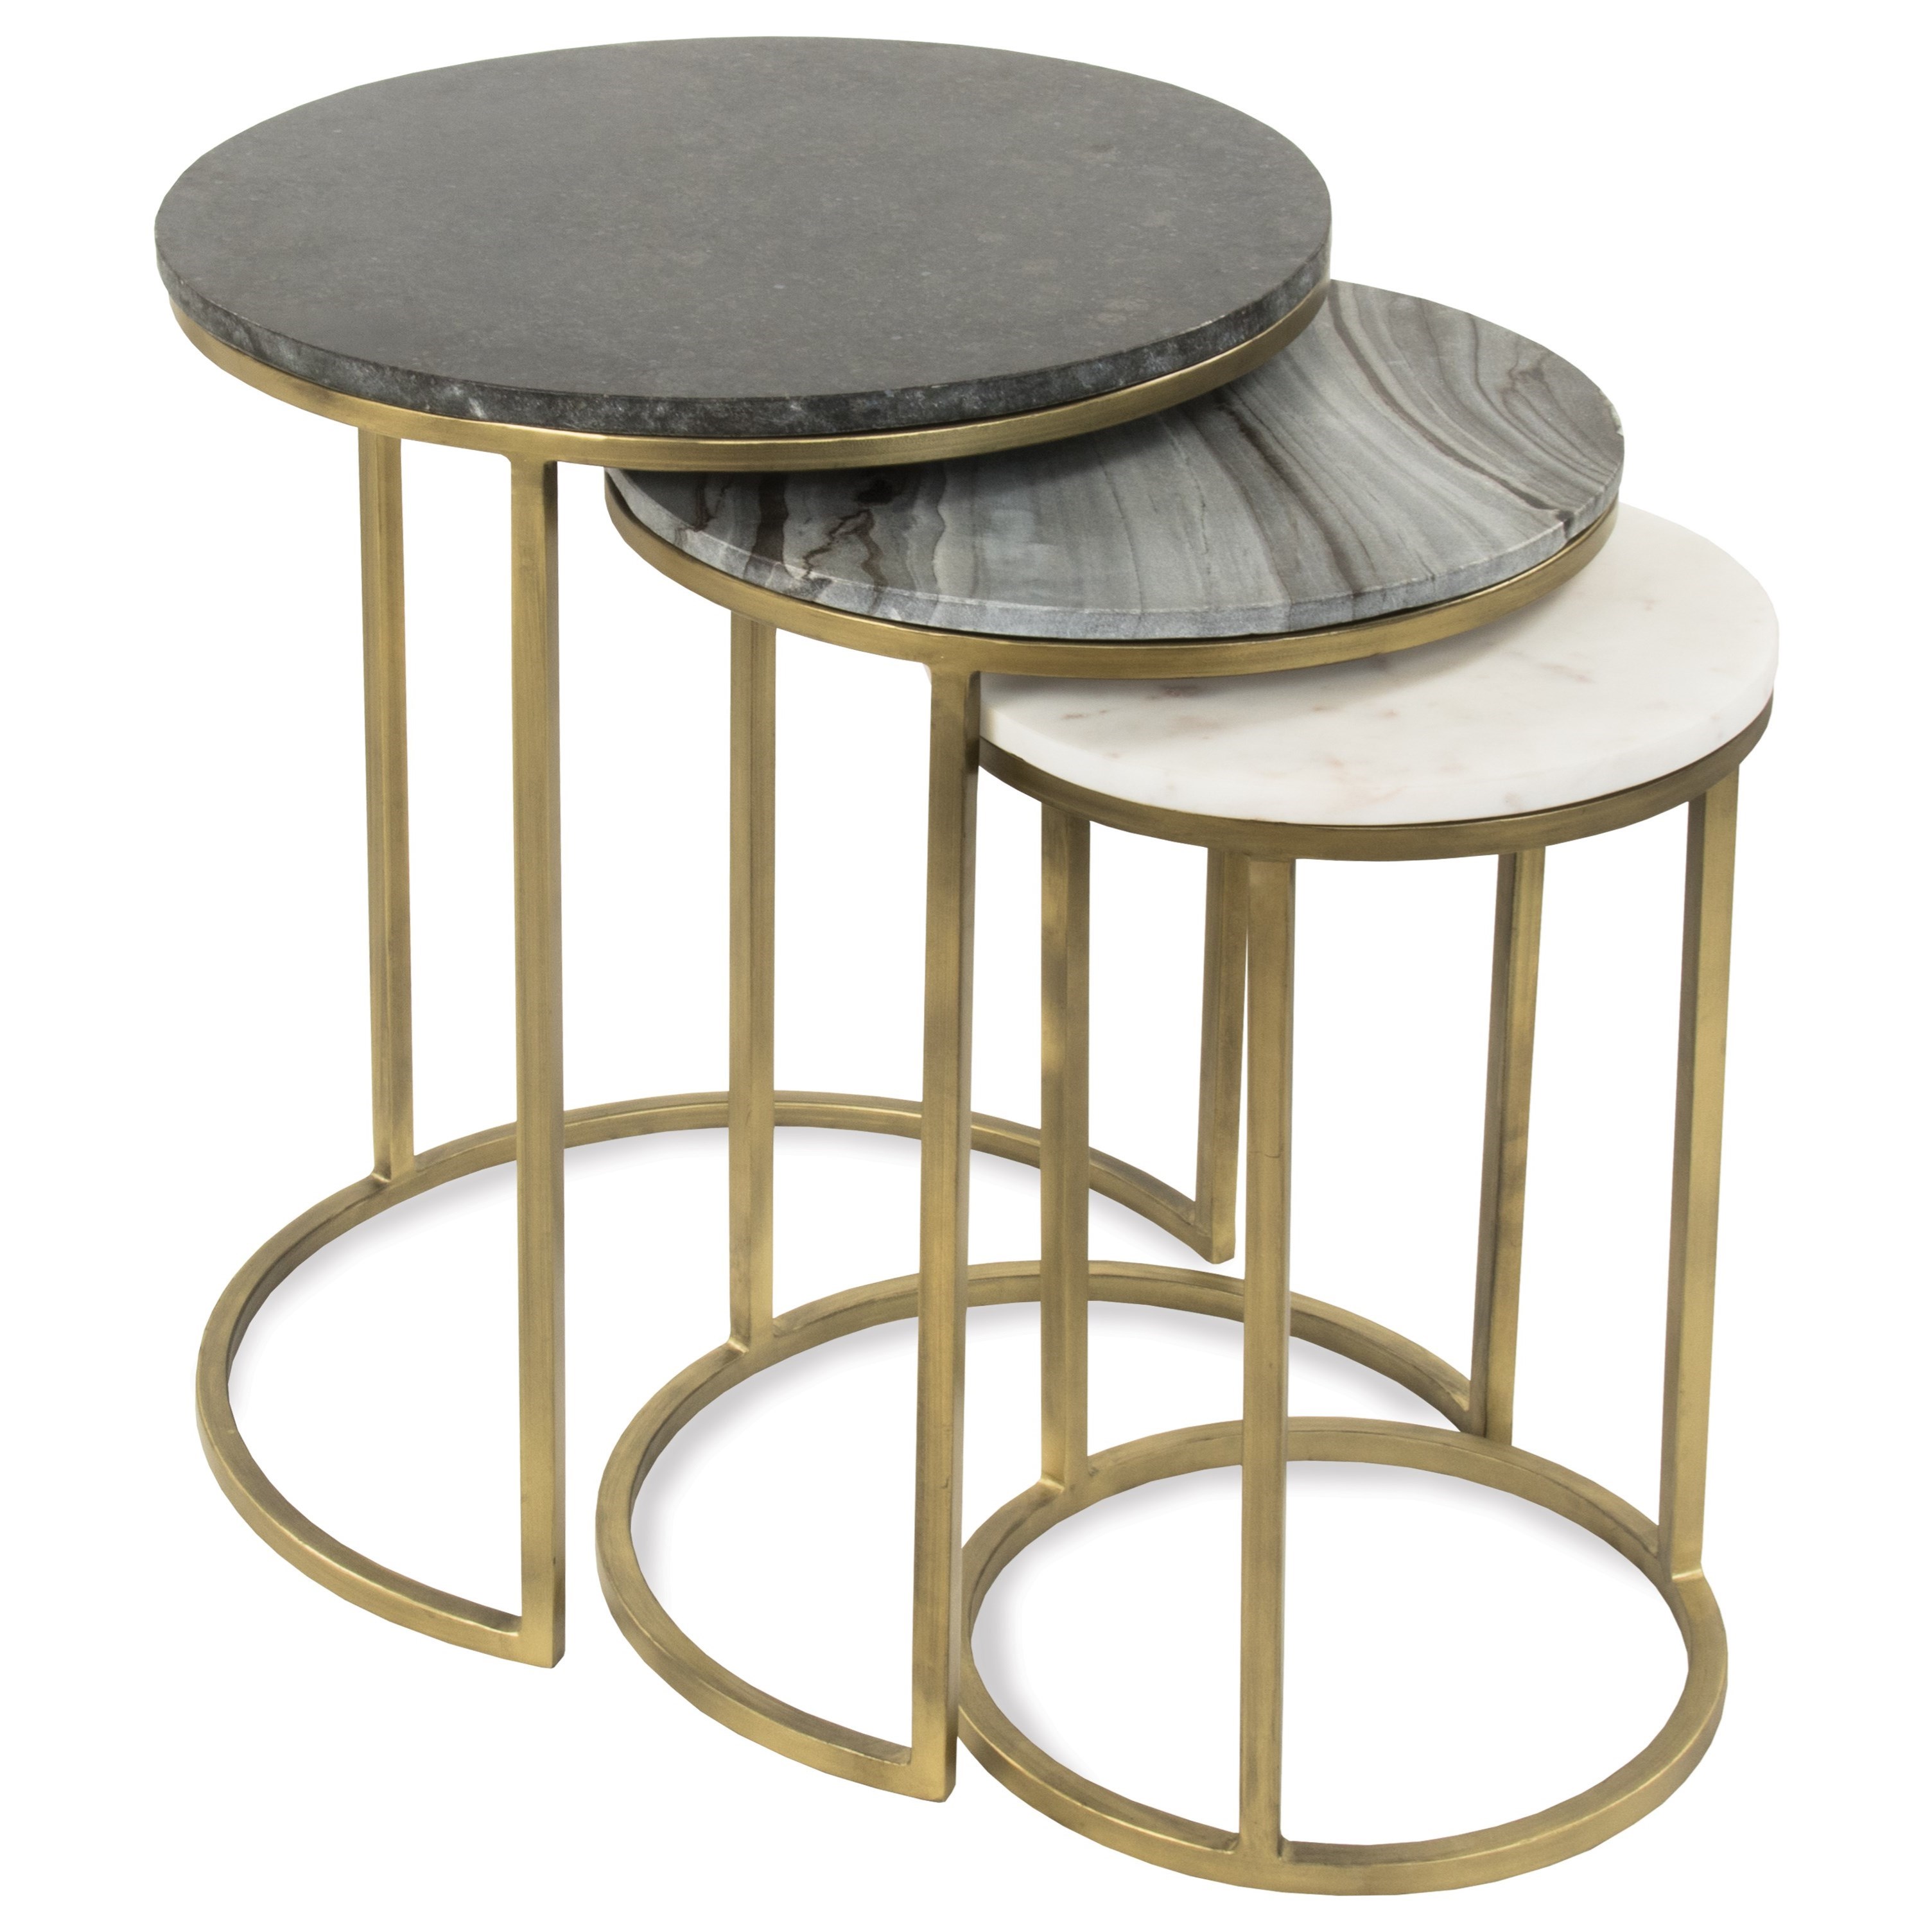 nesting side tables accent small nest metal lacquer table corner square outdoor full size glass top end with drawer off white distressed uma skinny farmhouse espresso colored